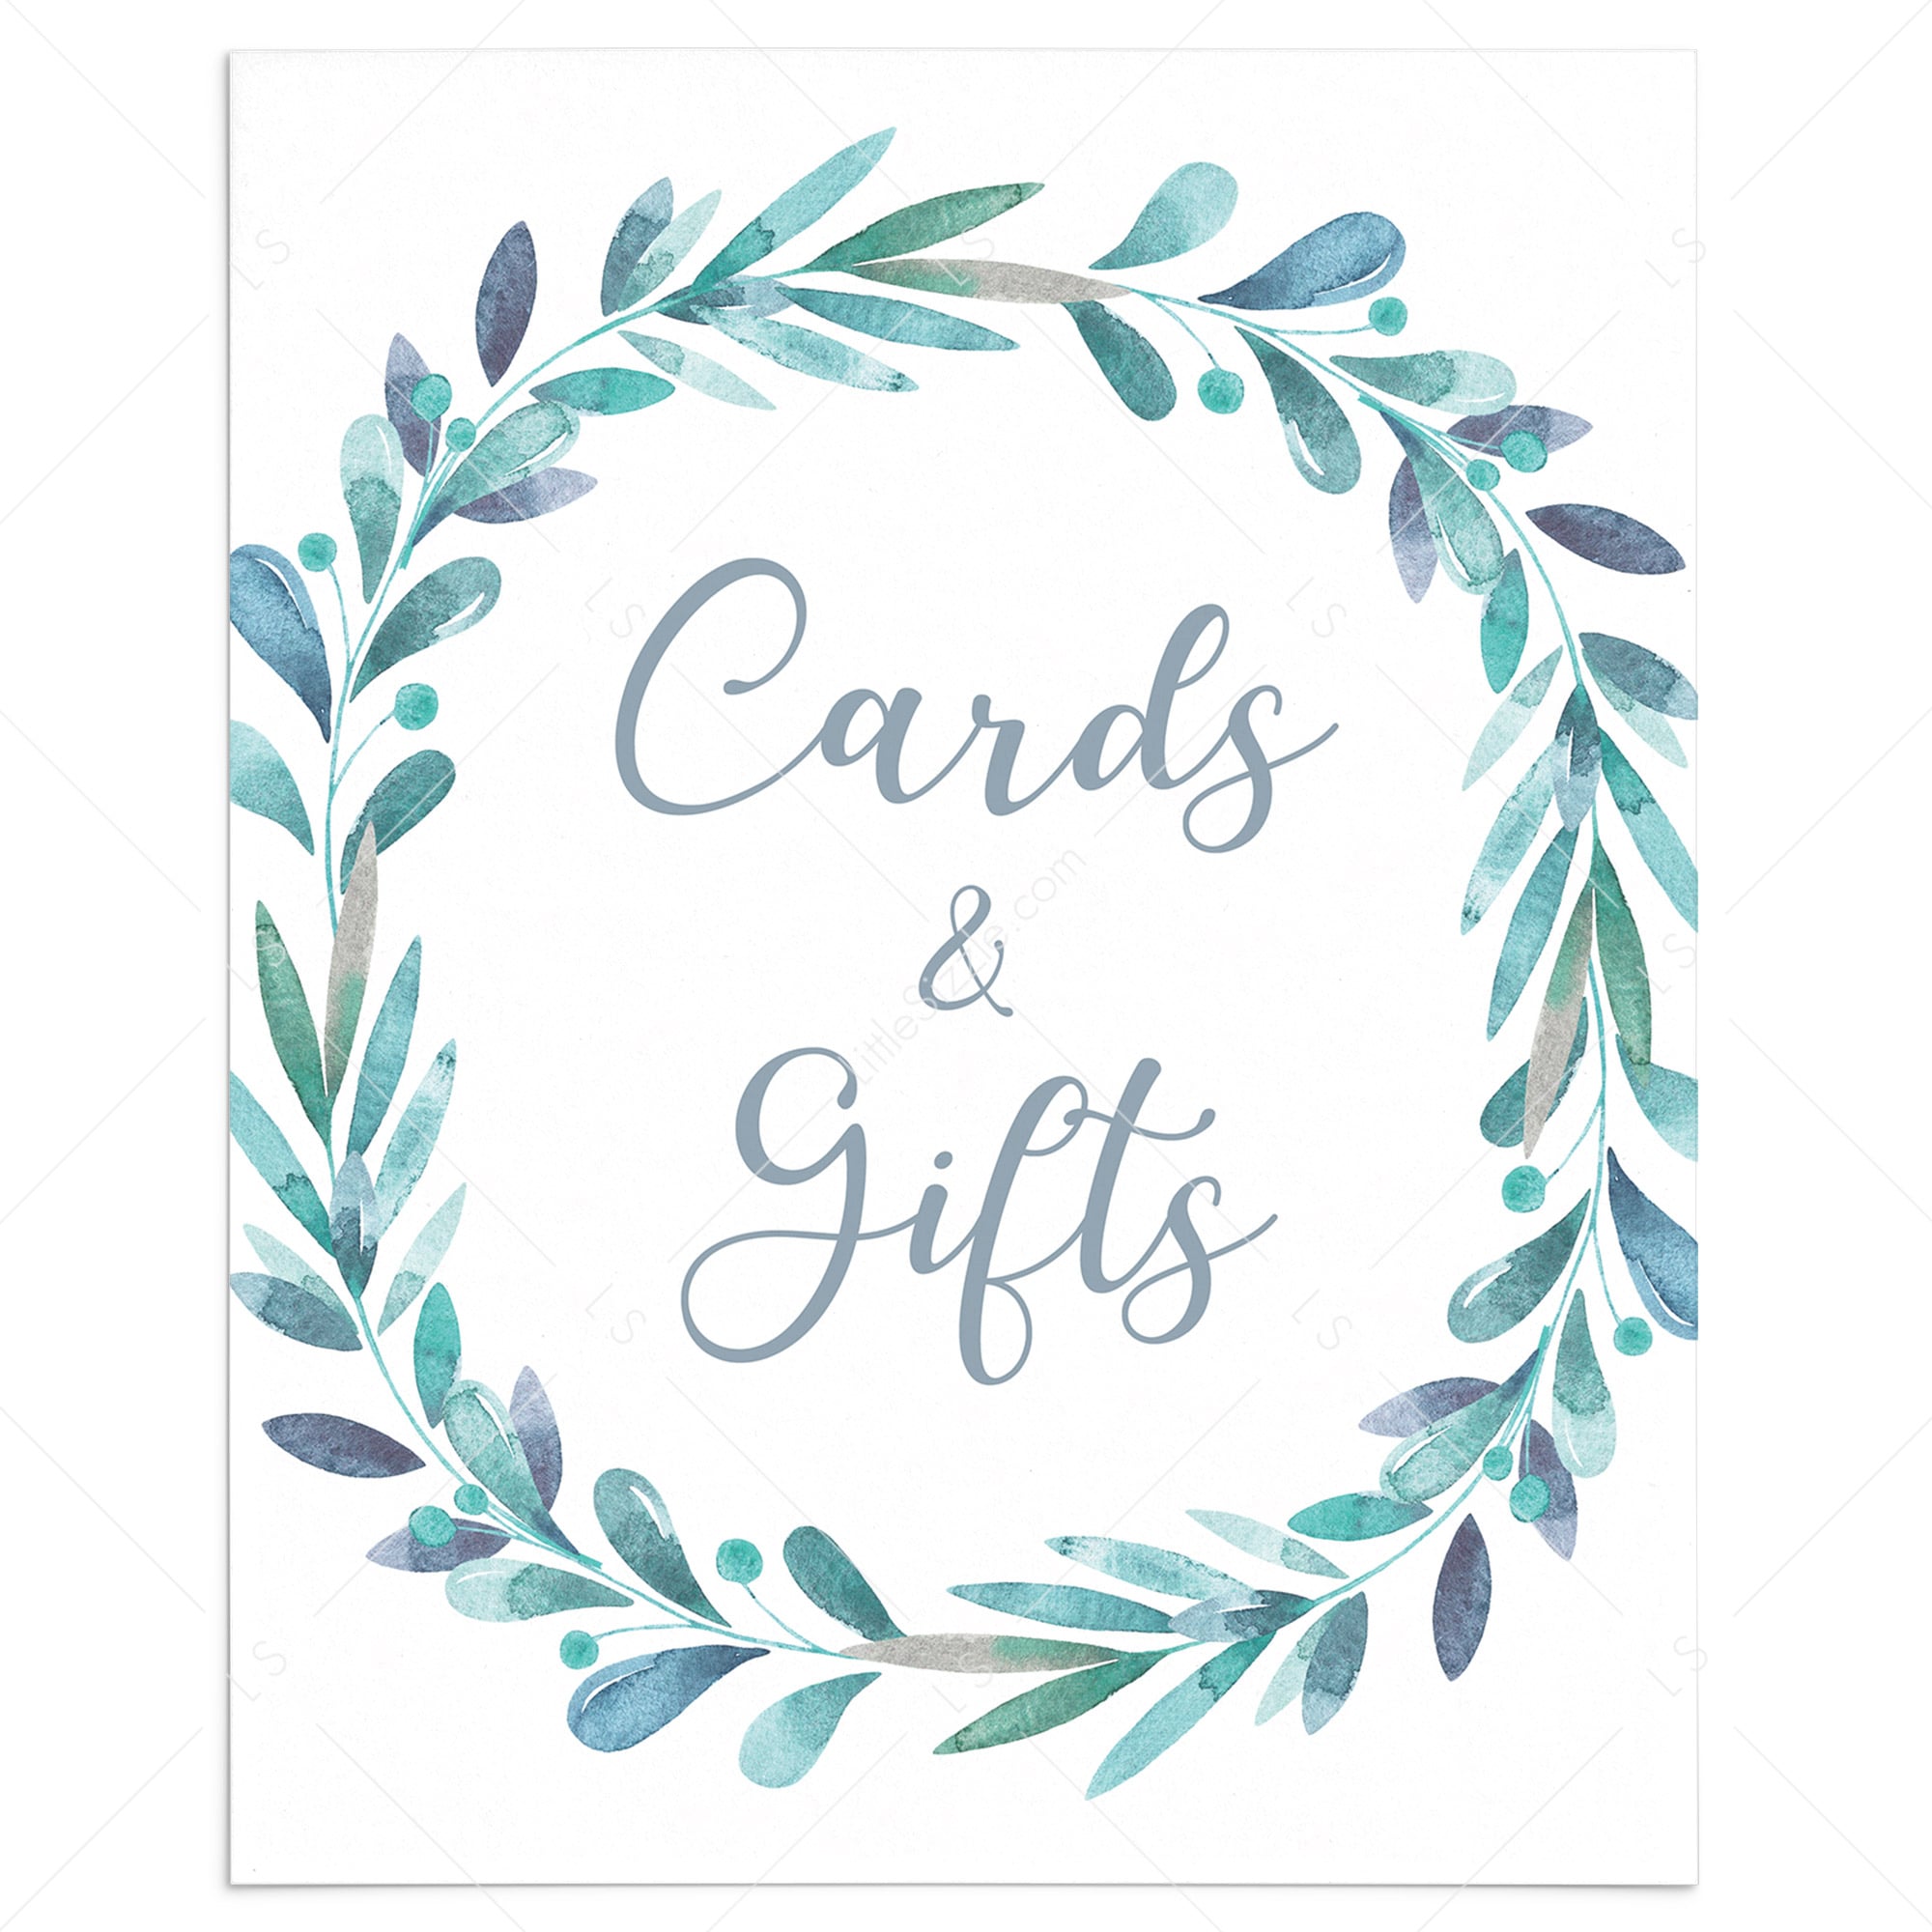 Printable Cards and Gifts Sign with Watercolor Wreath by LittleSizzle